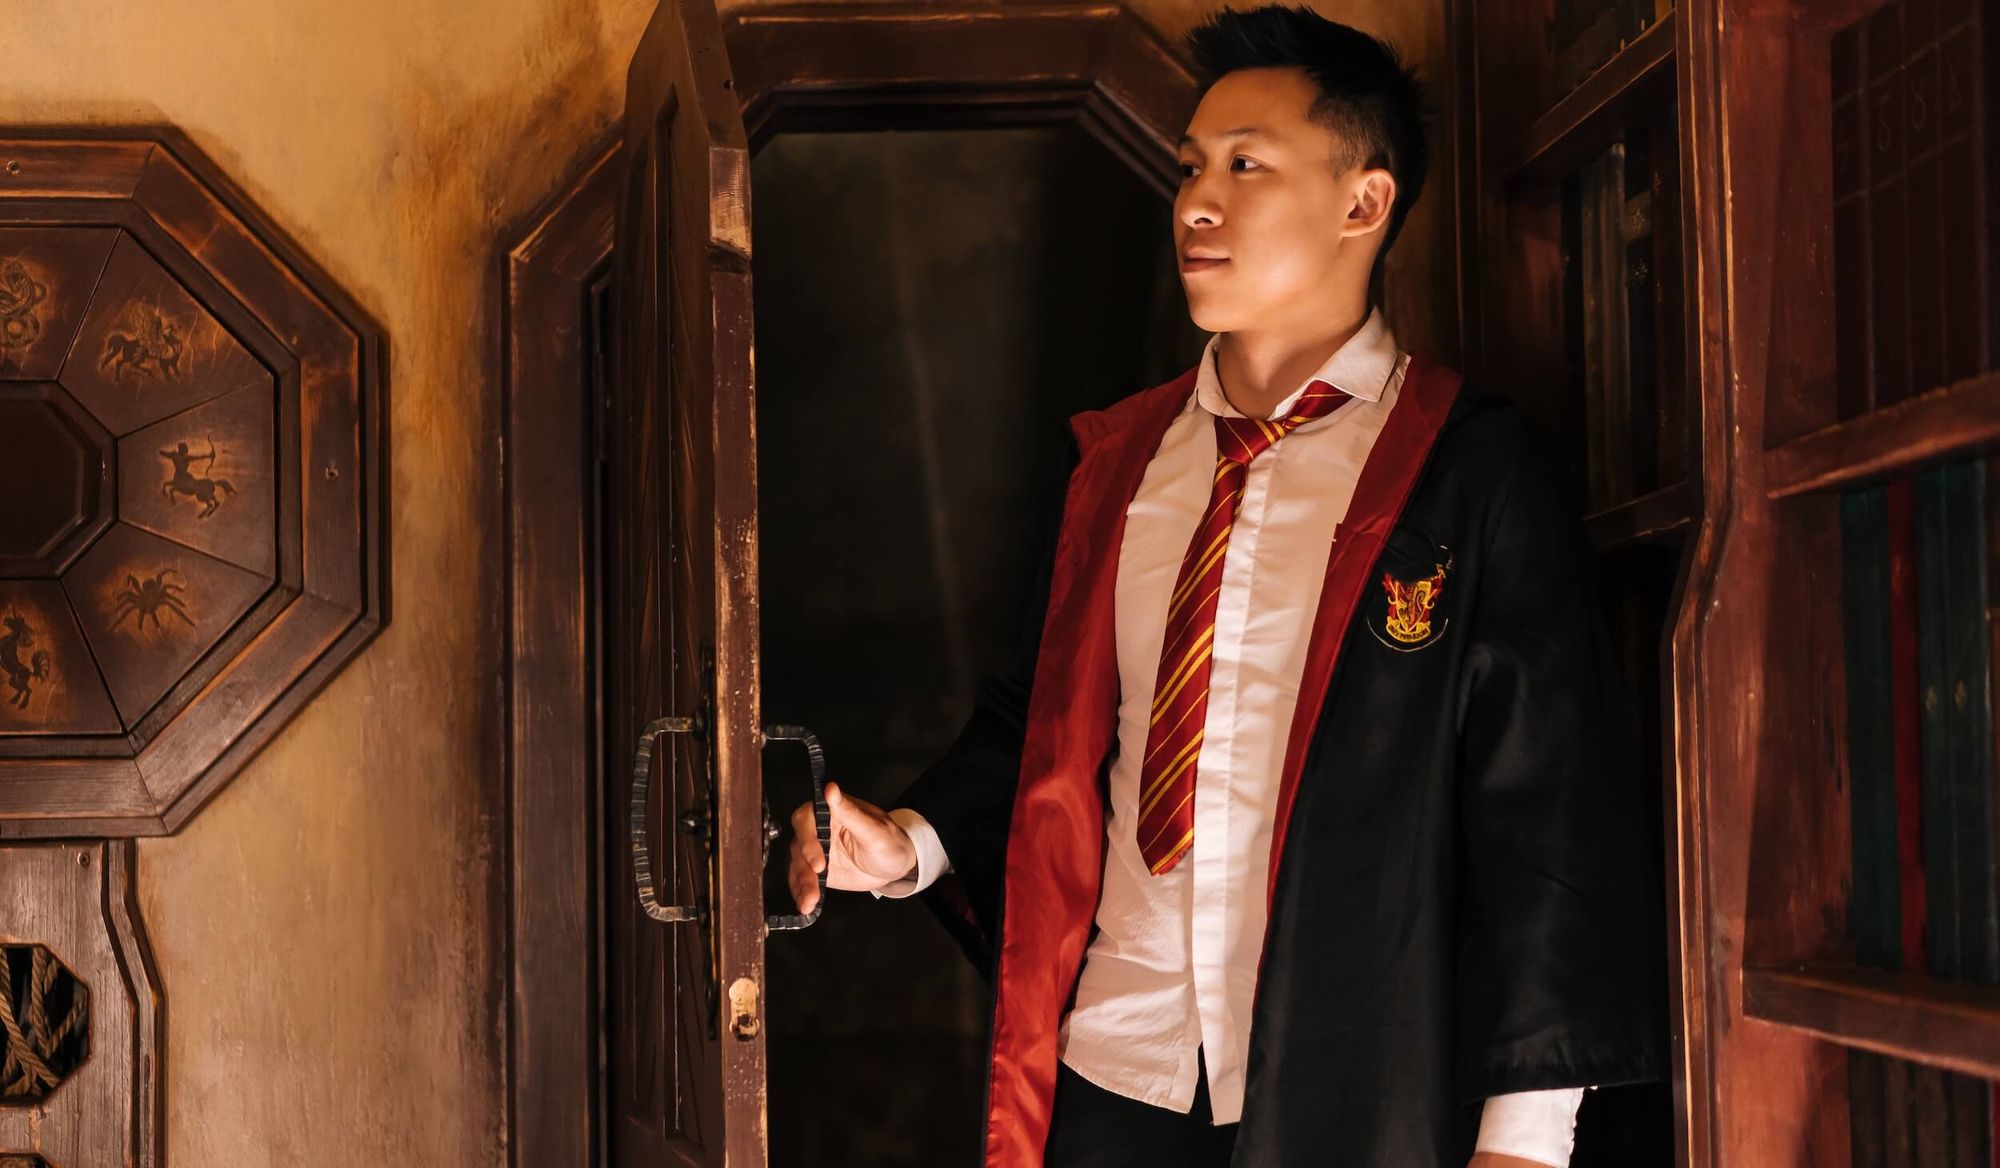 Man wearing Harry Potter style robes and maroon school tie in an old office.